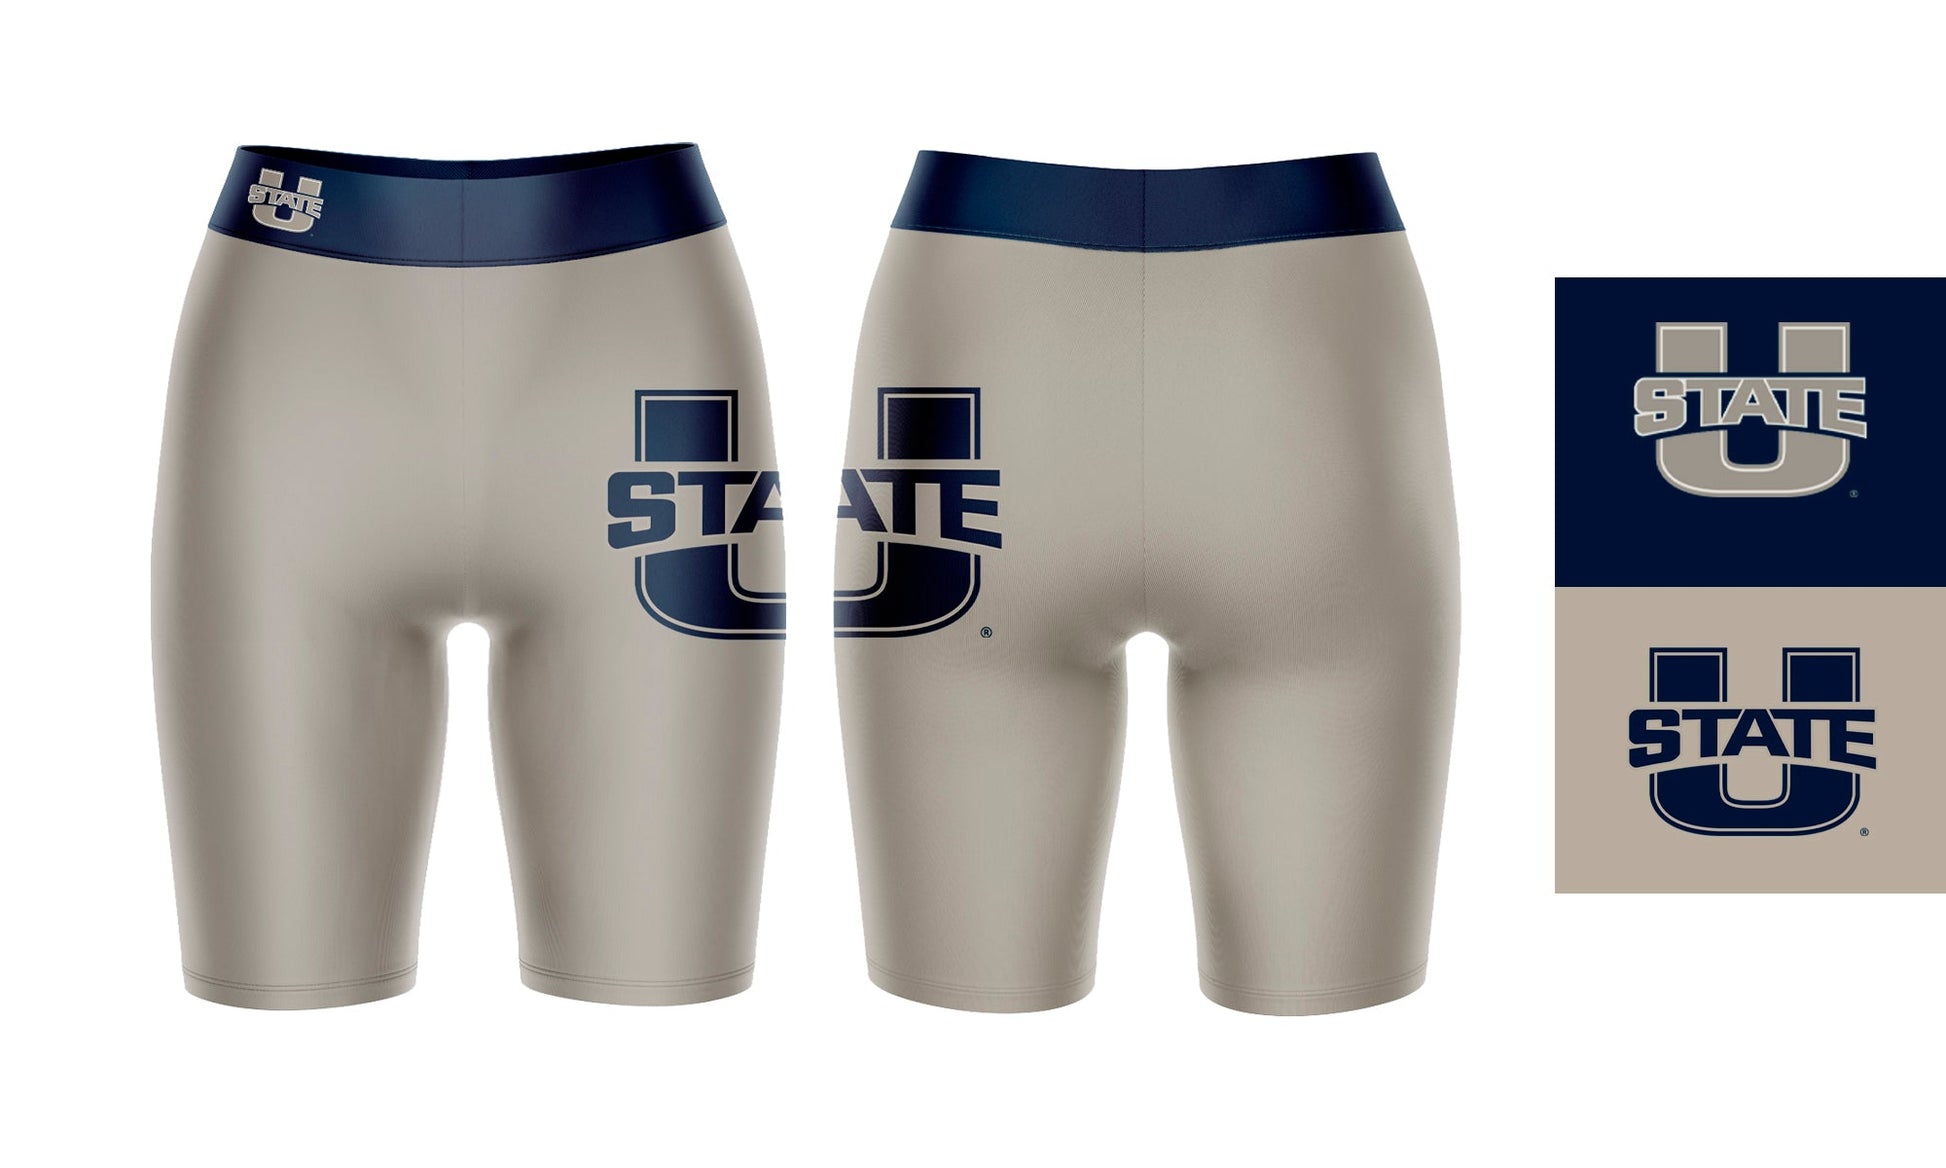 Utah State Aggies Vive La Fete Game Day Logo on Thigh and Waistband Gray and Blue Women Bike Short 9 Inseam